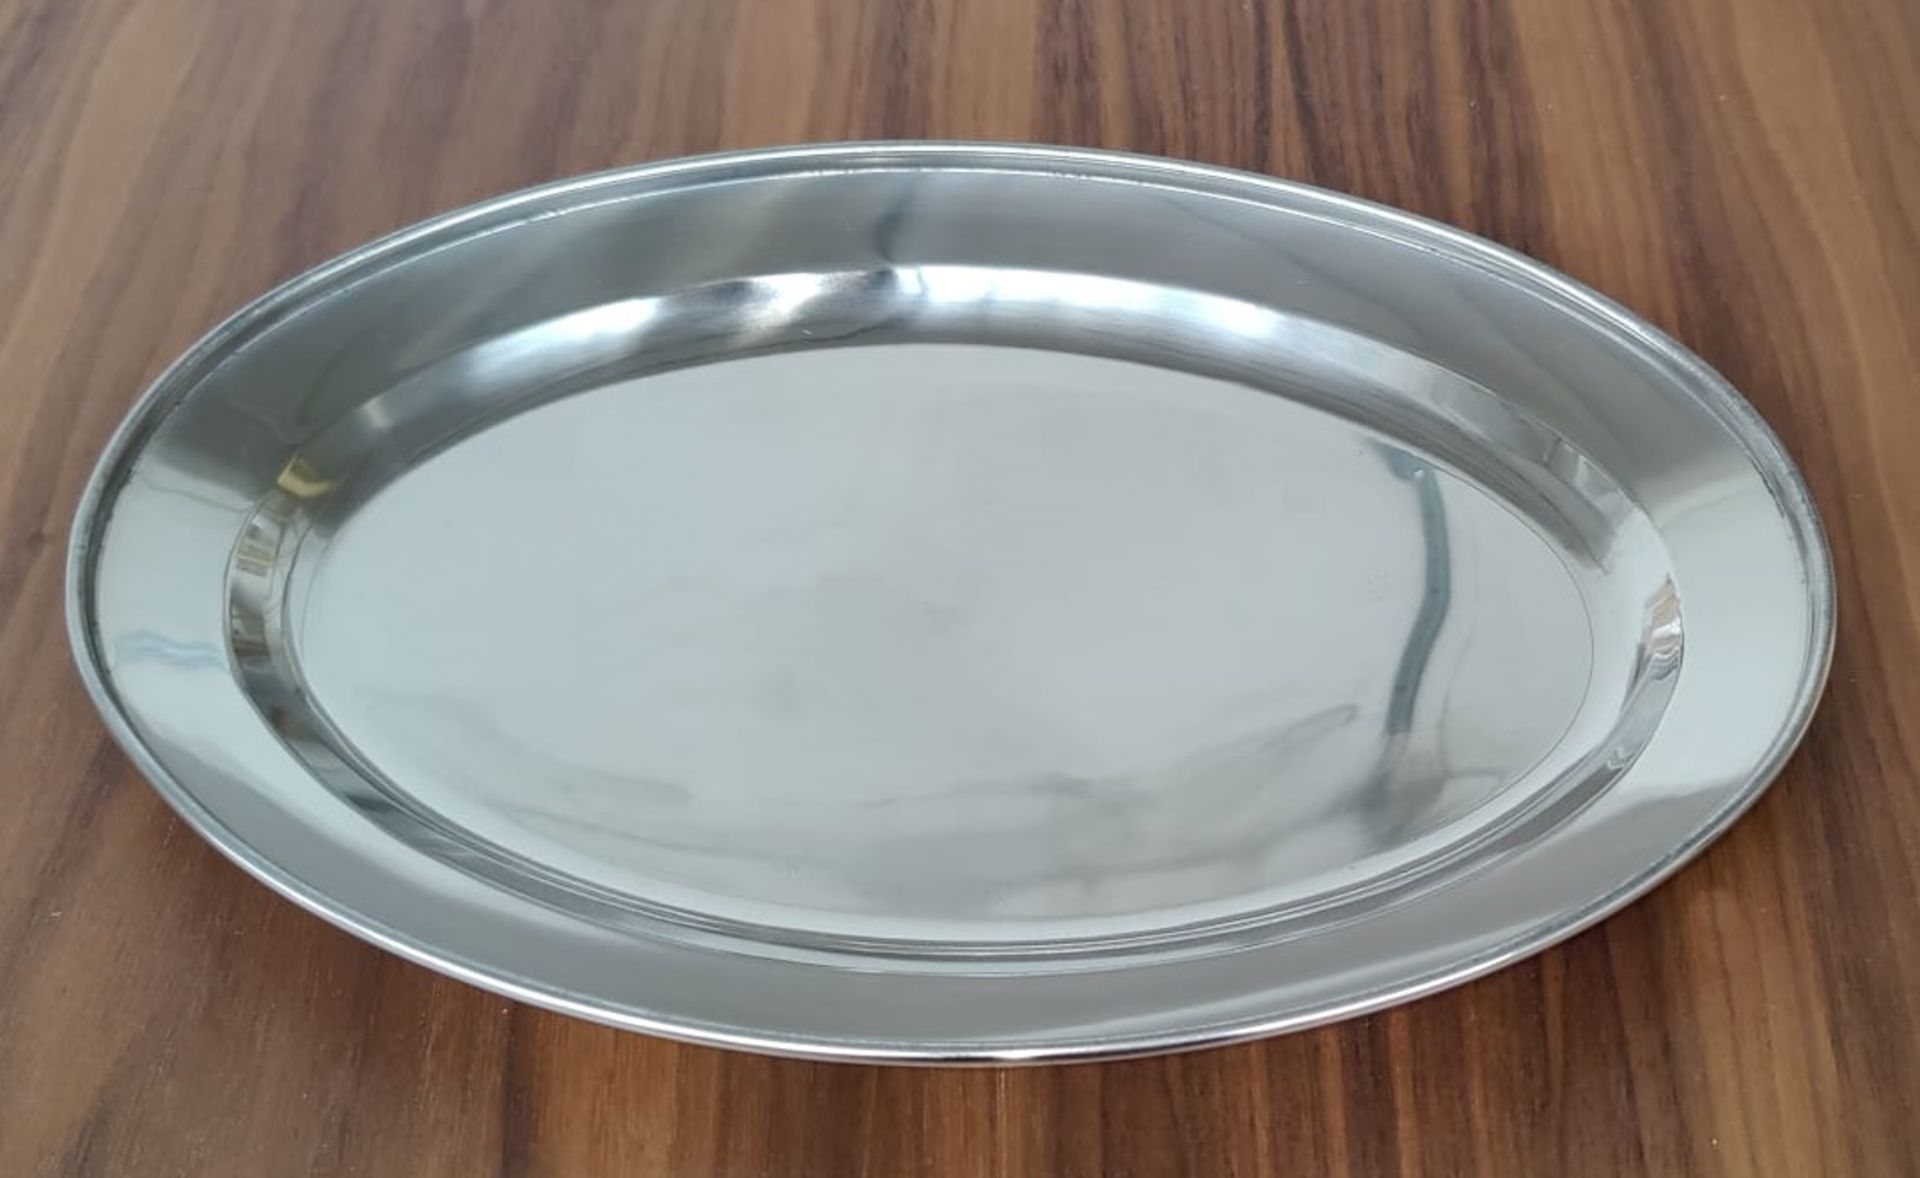 18 x Stainless Steel Small Oval Service Trays - Size: 255mm x 180mm - Brand New Boxed Stock RRP £90 - Image 3 of 8